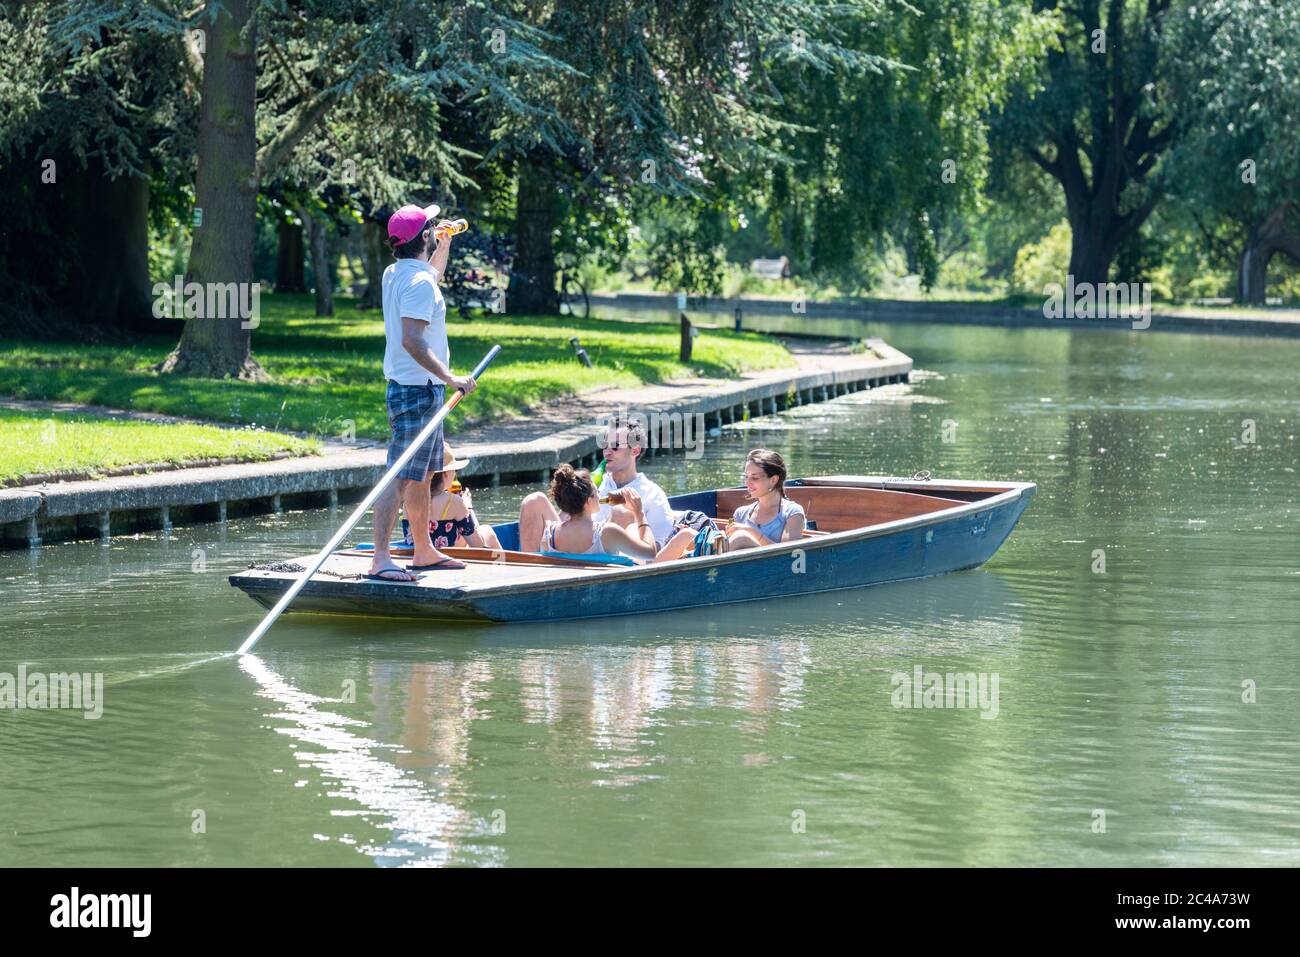 Cambridge, UK. 25th June, 2020. People enjoy the heatwave punting on the River Cam as temperatures rise above 30 degrees centigrade. The river is very quiet due to the shutting of most punting companies during the coronavirus lockdown. There are also warnings of high ultraviolet violet rays in the less polluted summer weather. Credit: Julian Eales/Alamy Live News Stock Photo